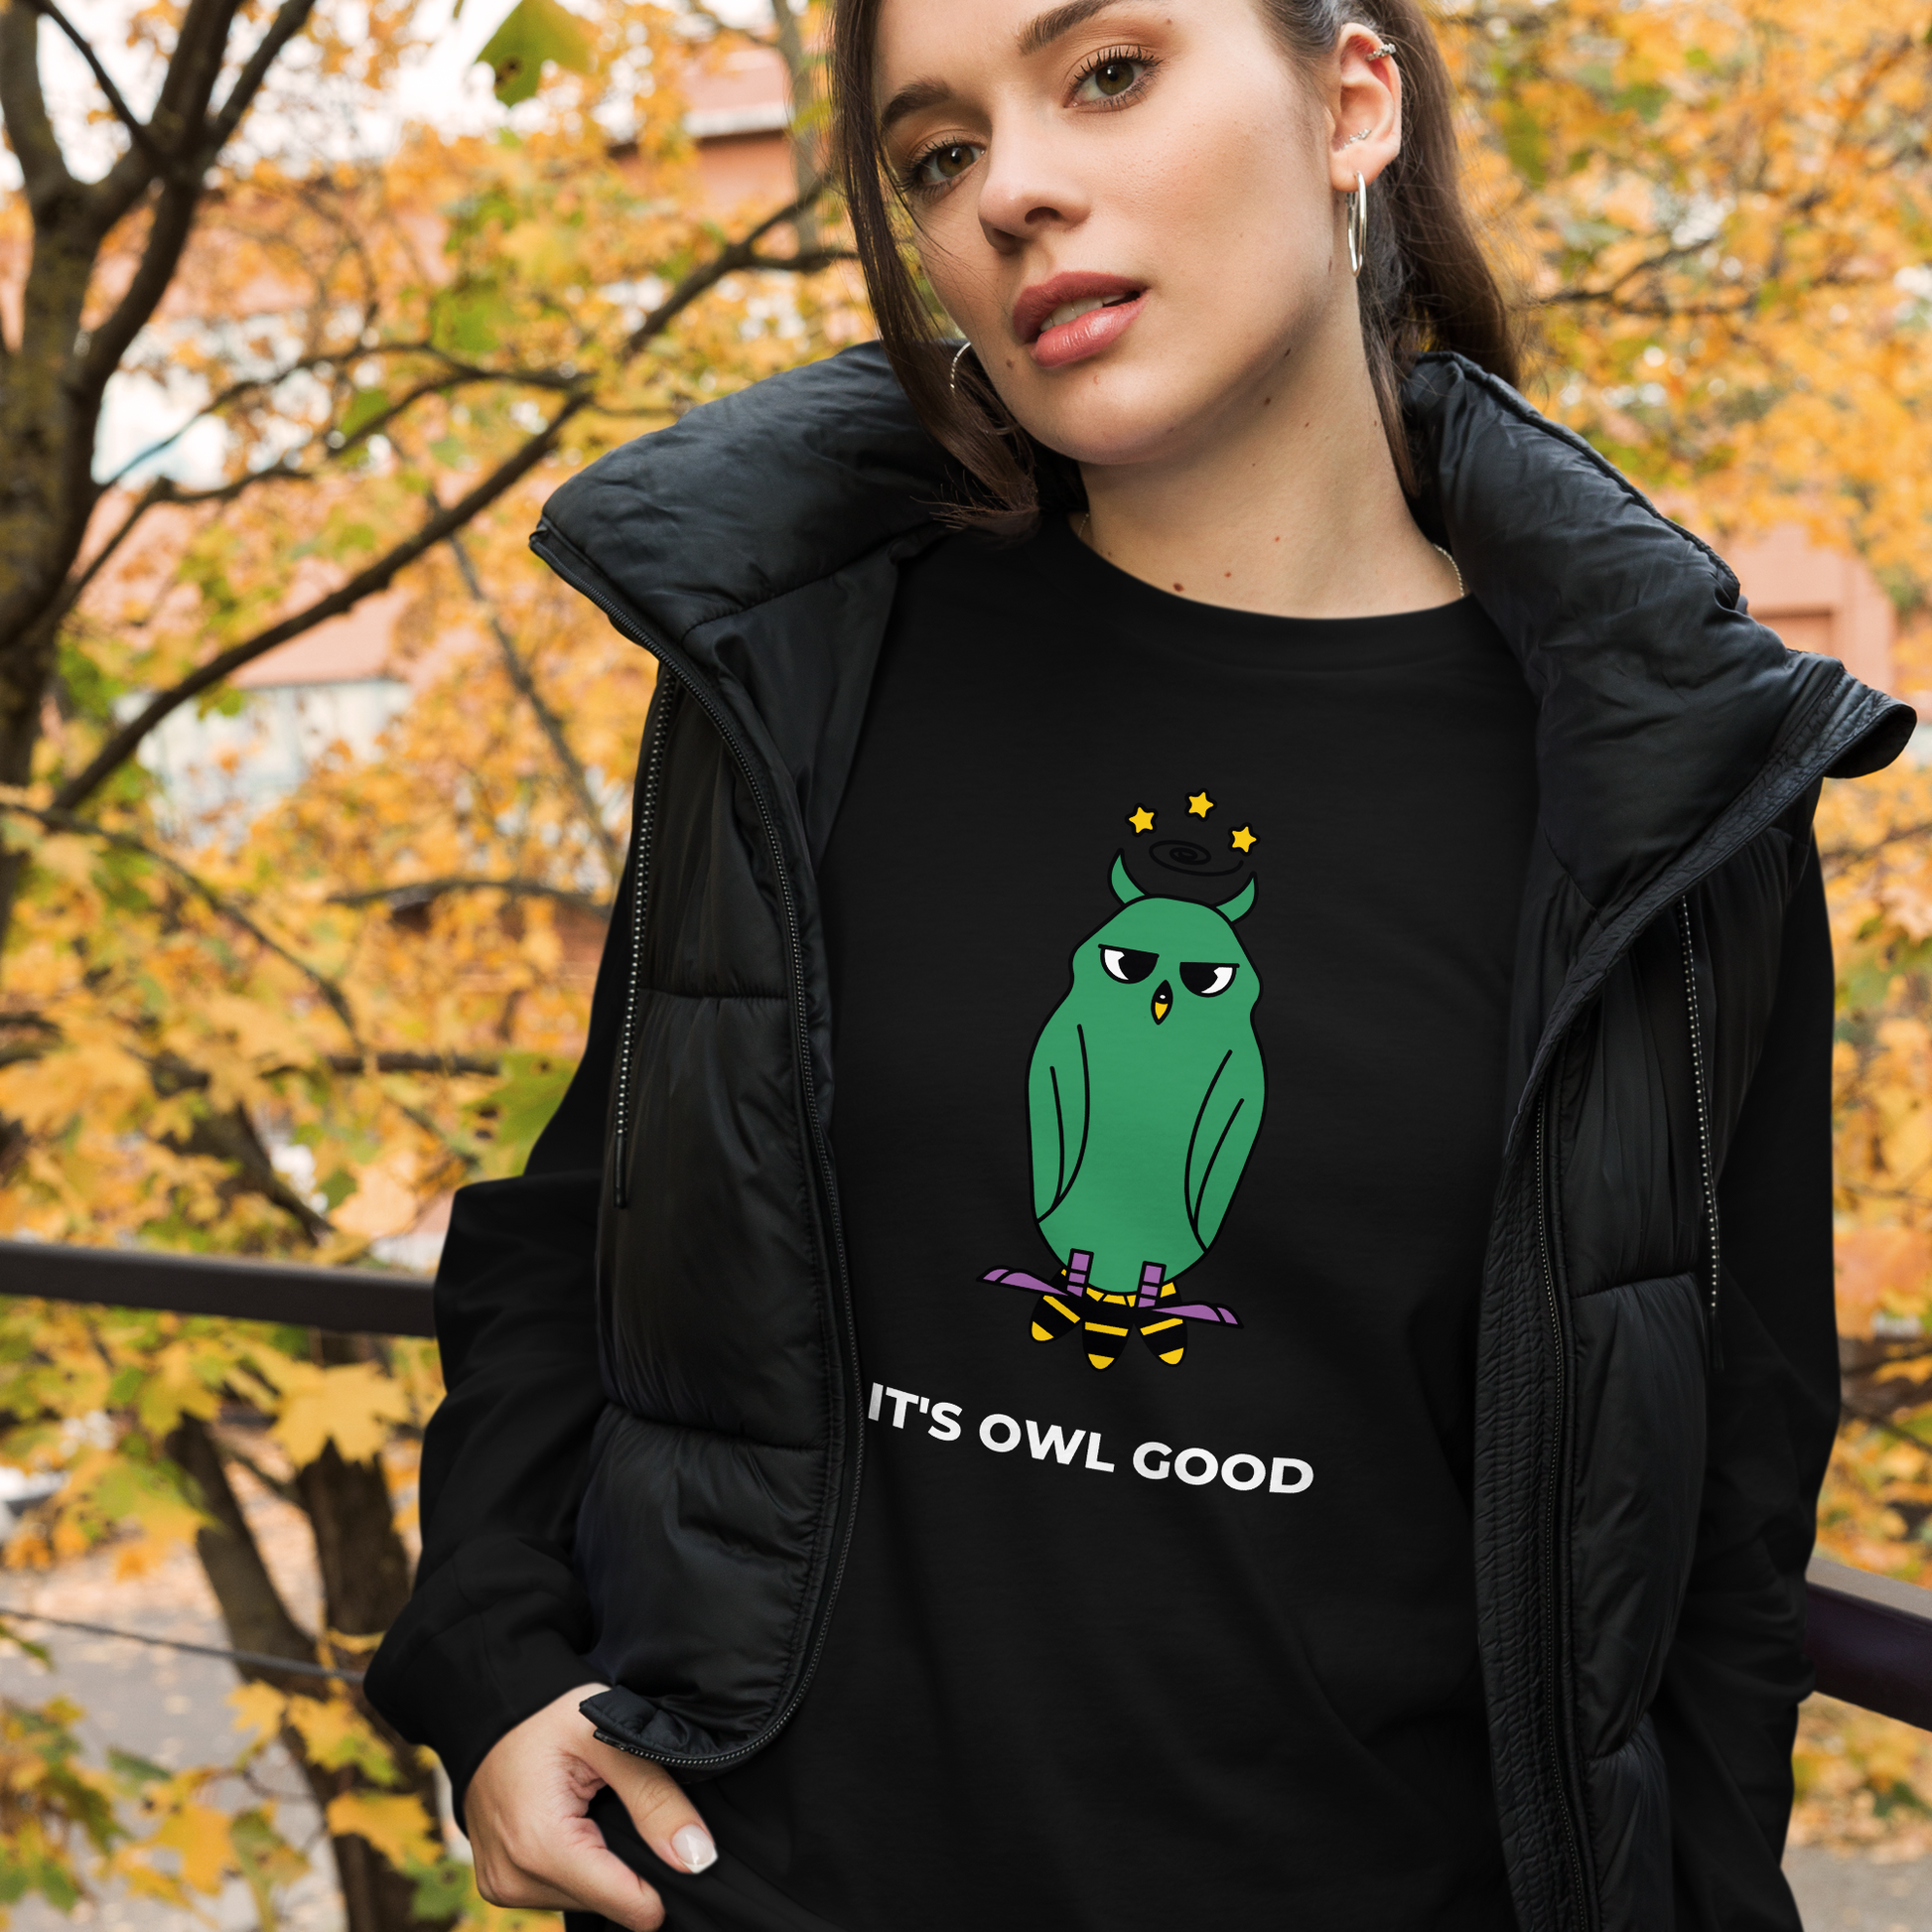 Woman Wearing a Black Owl Long Sleeve Tee featuring a captivating It's Owl Good graphic on the chest - Funny Owl Long Sleeve Graphic Tees - Boozy Fox